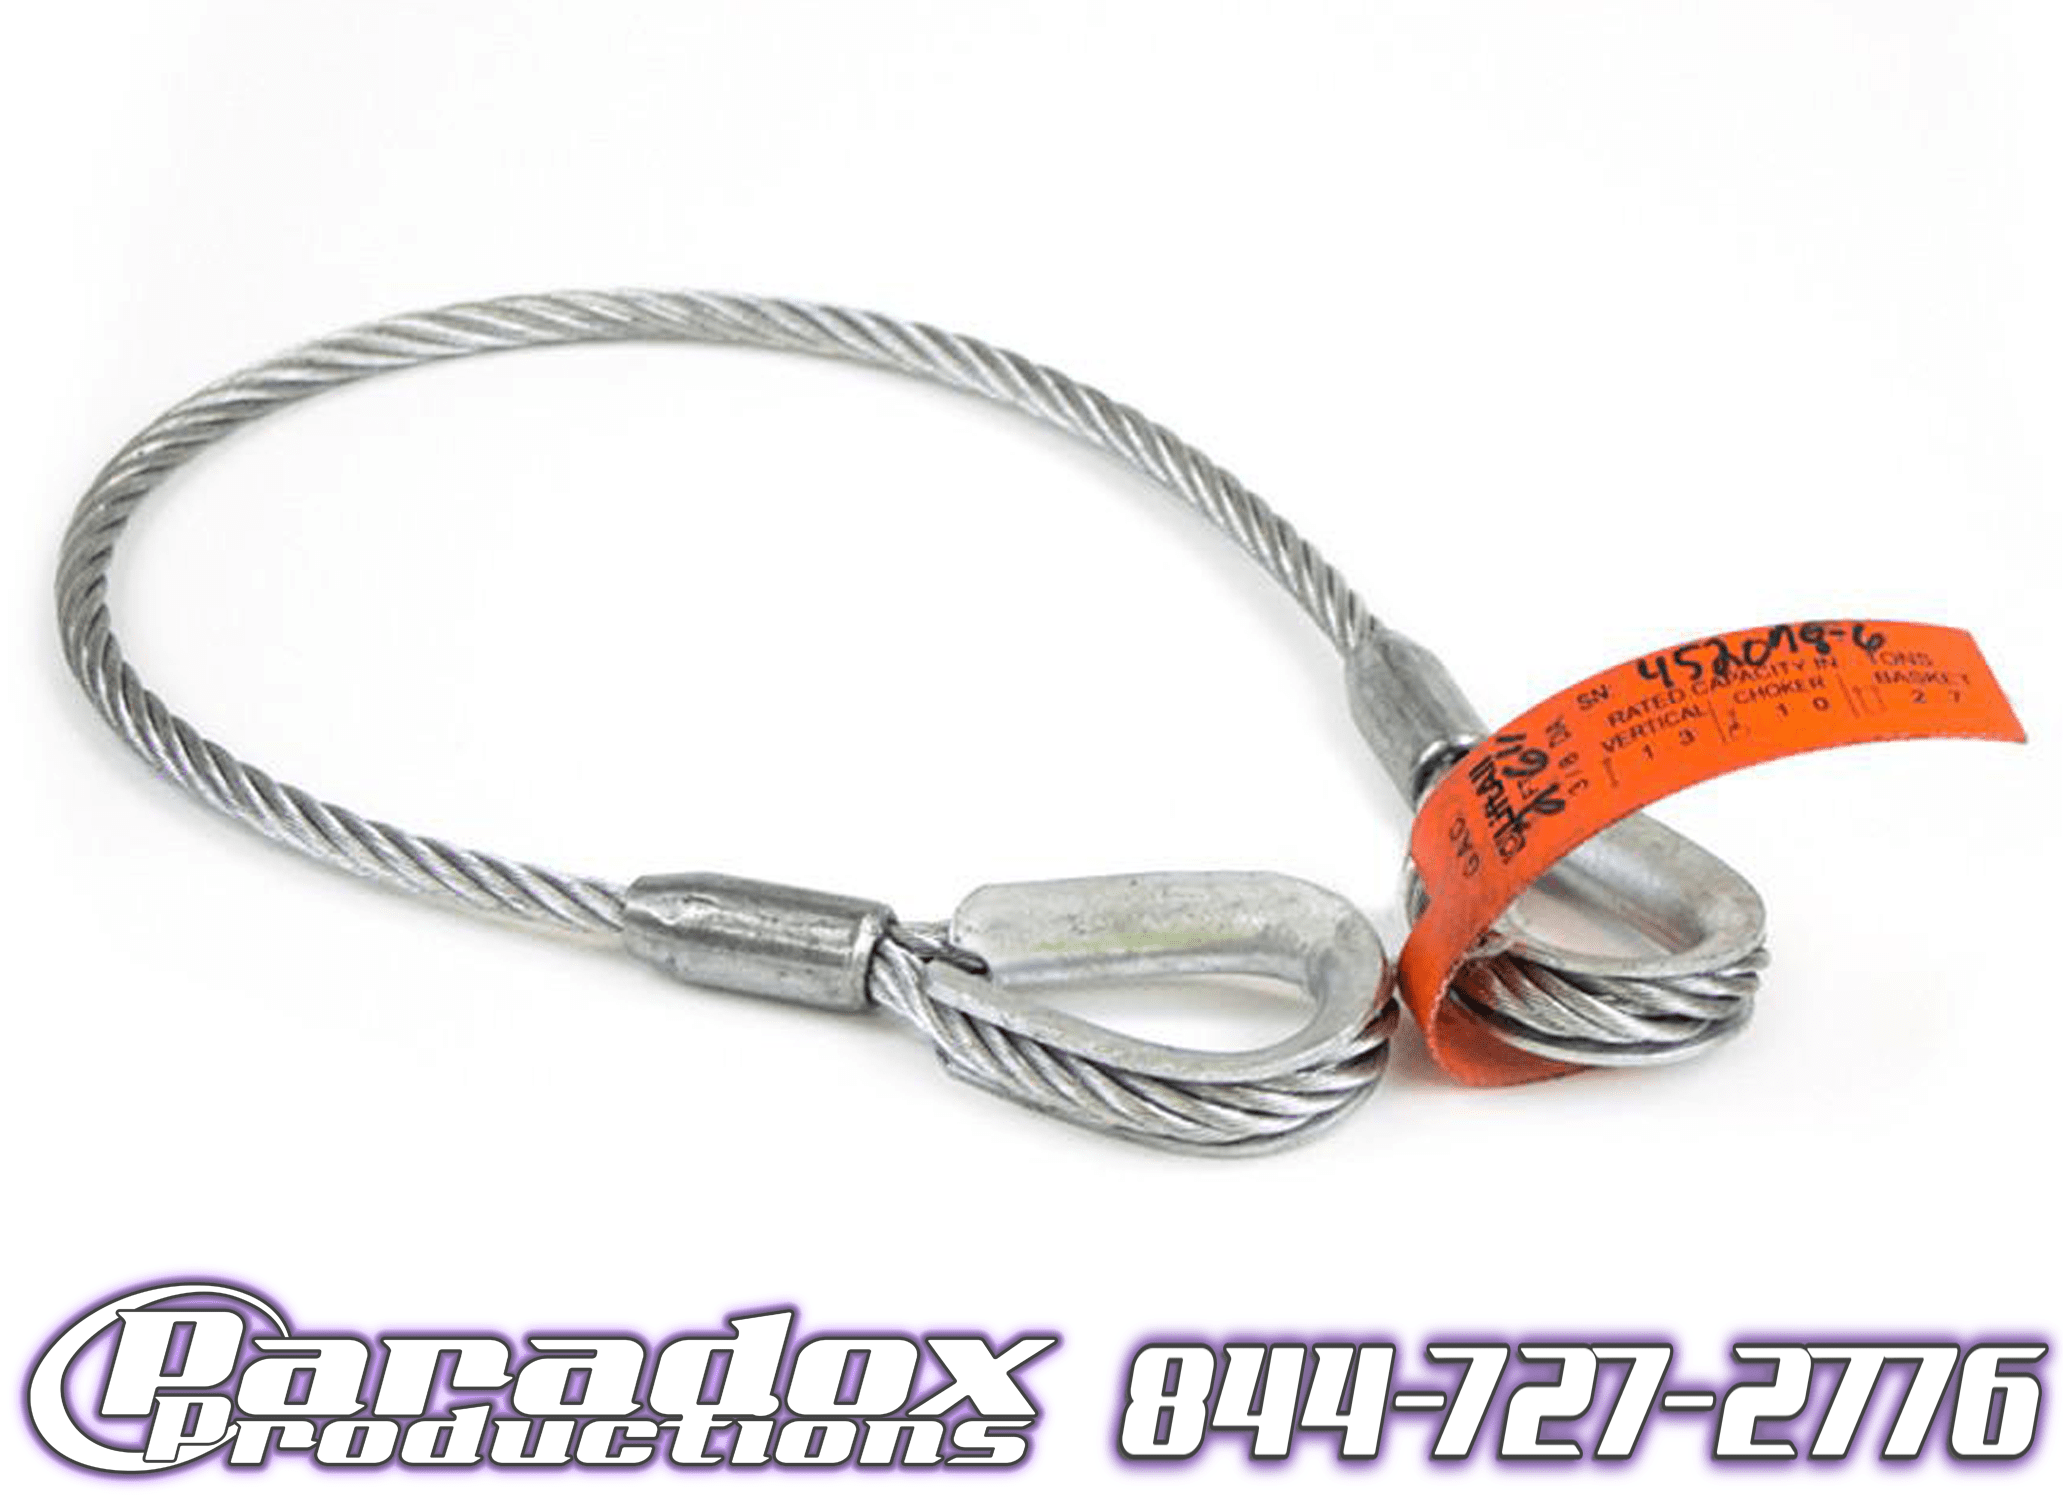 A strong steel sling featuring an orange tag.